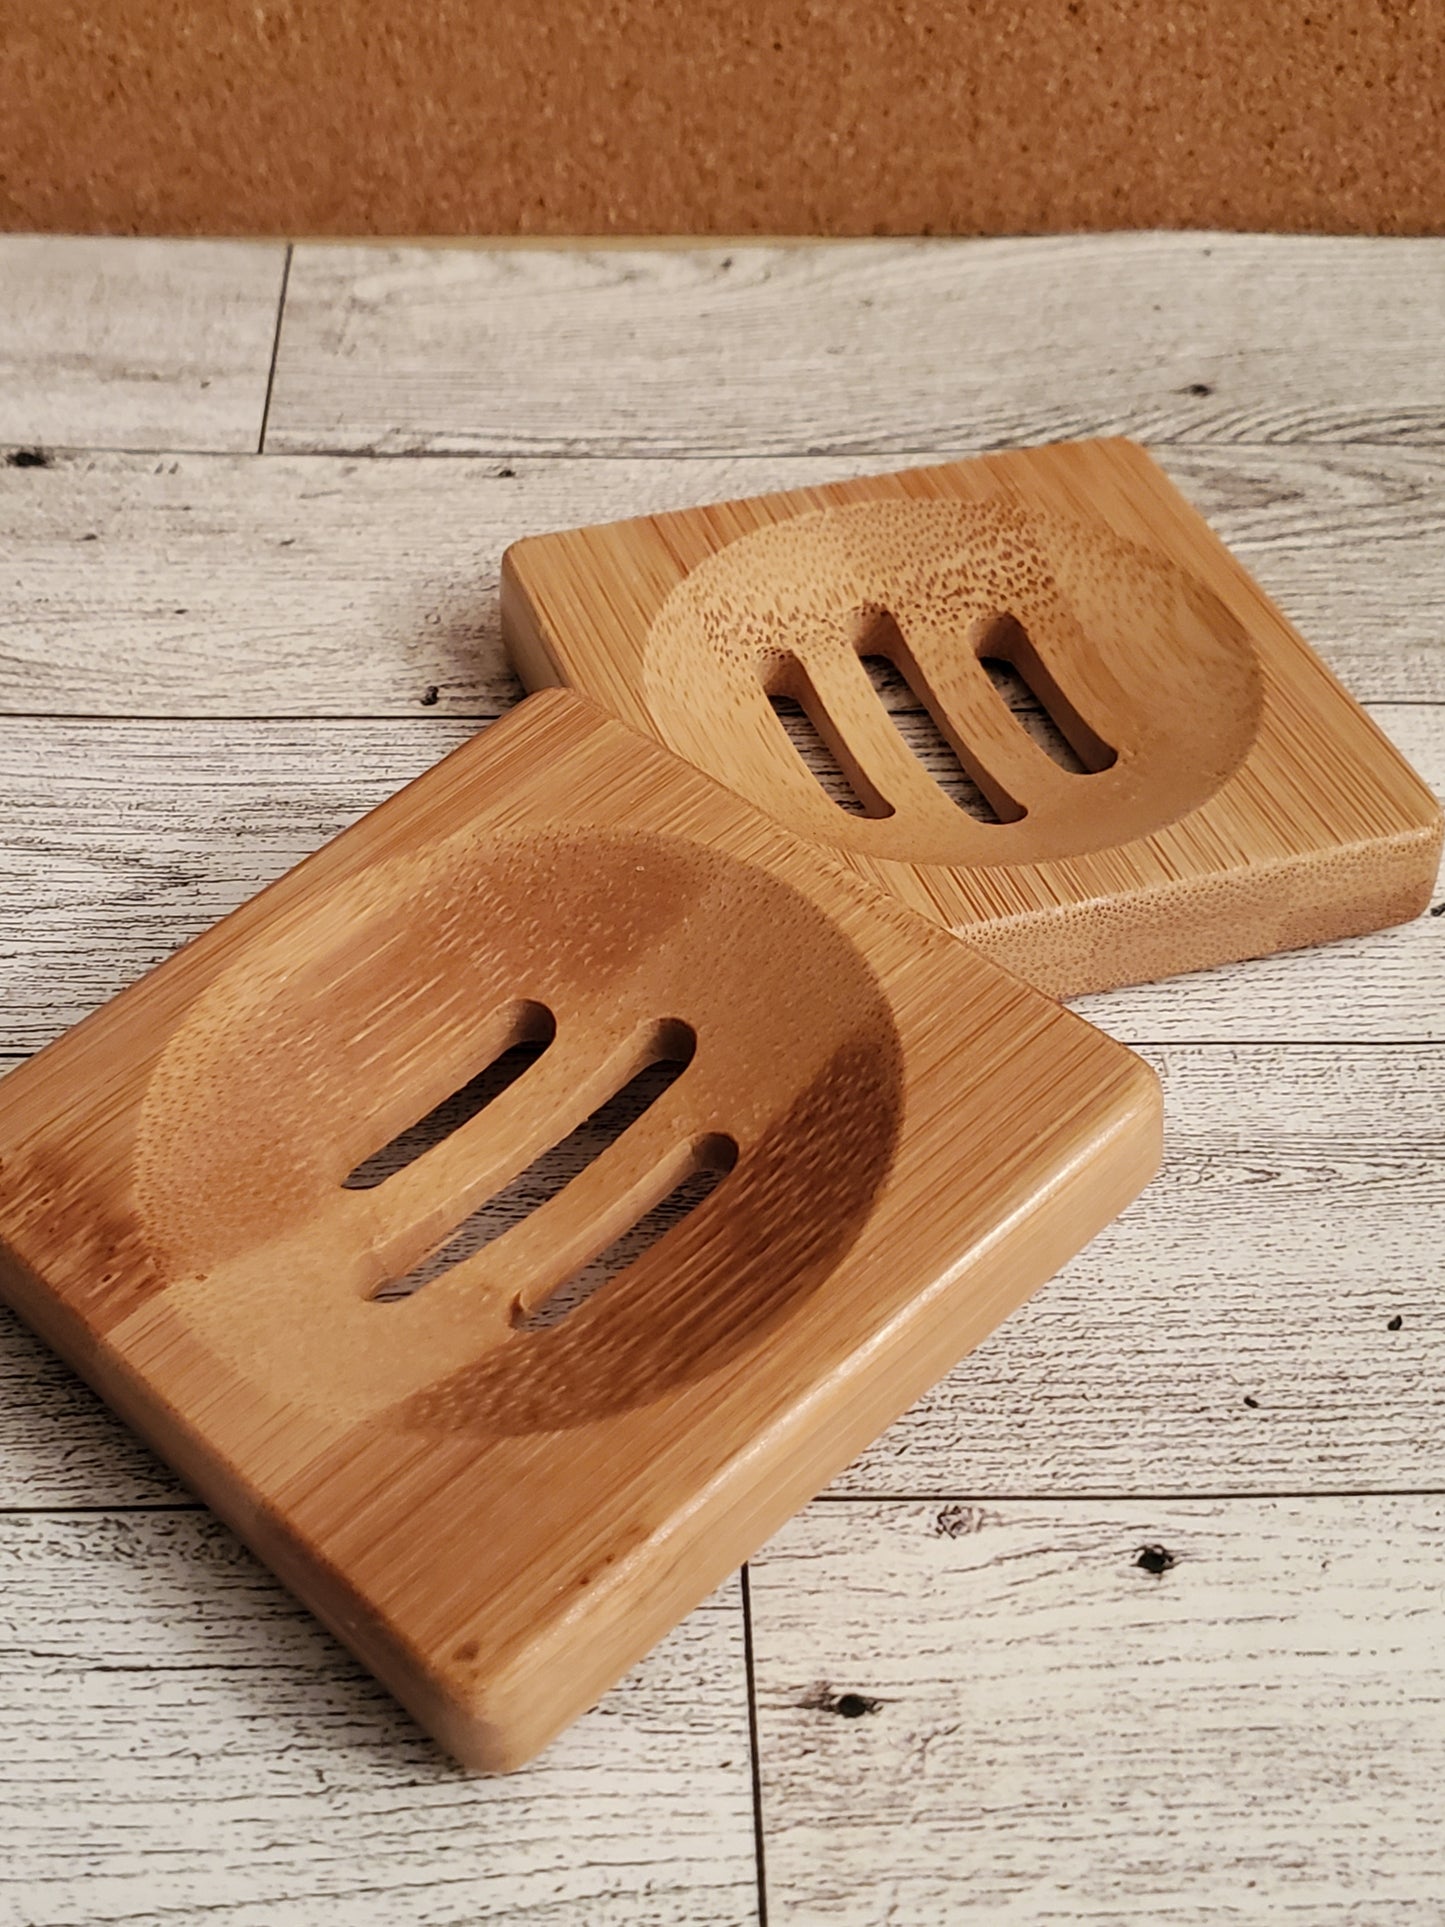 2 Medium color wooden soap dishes together (smaller) 